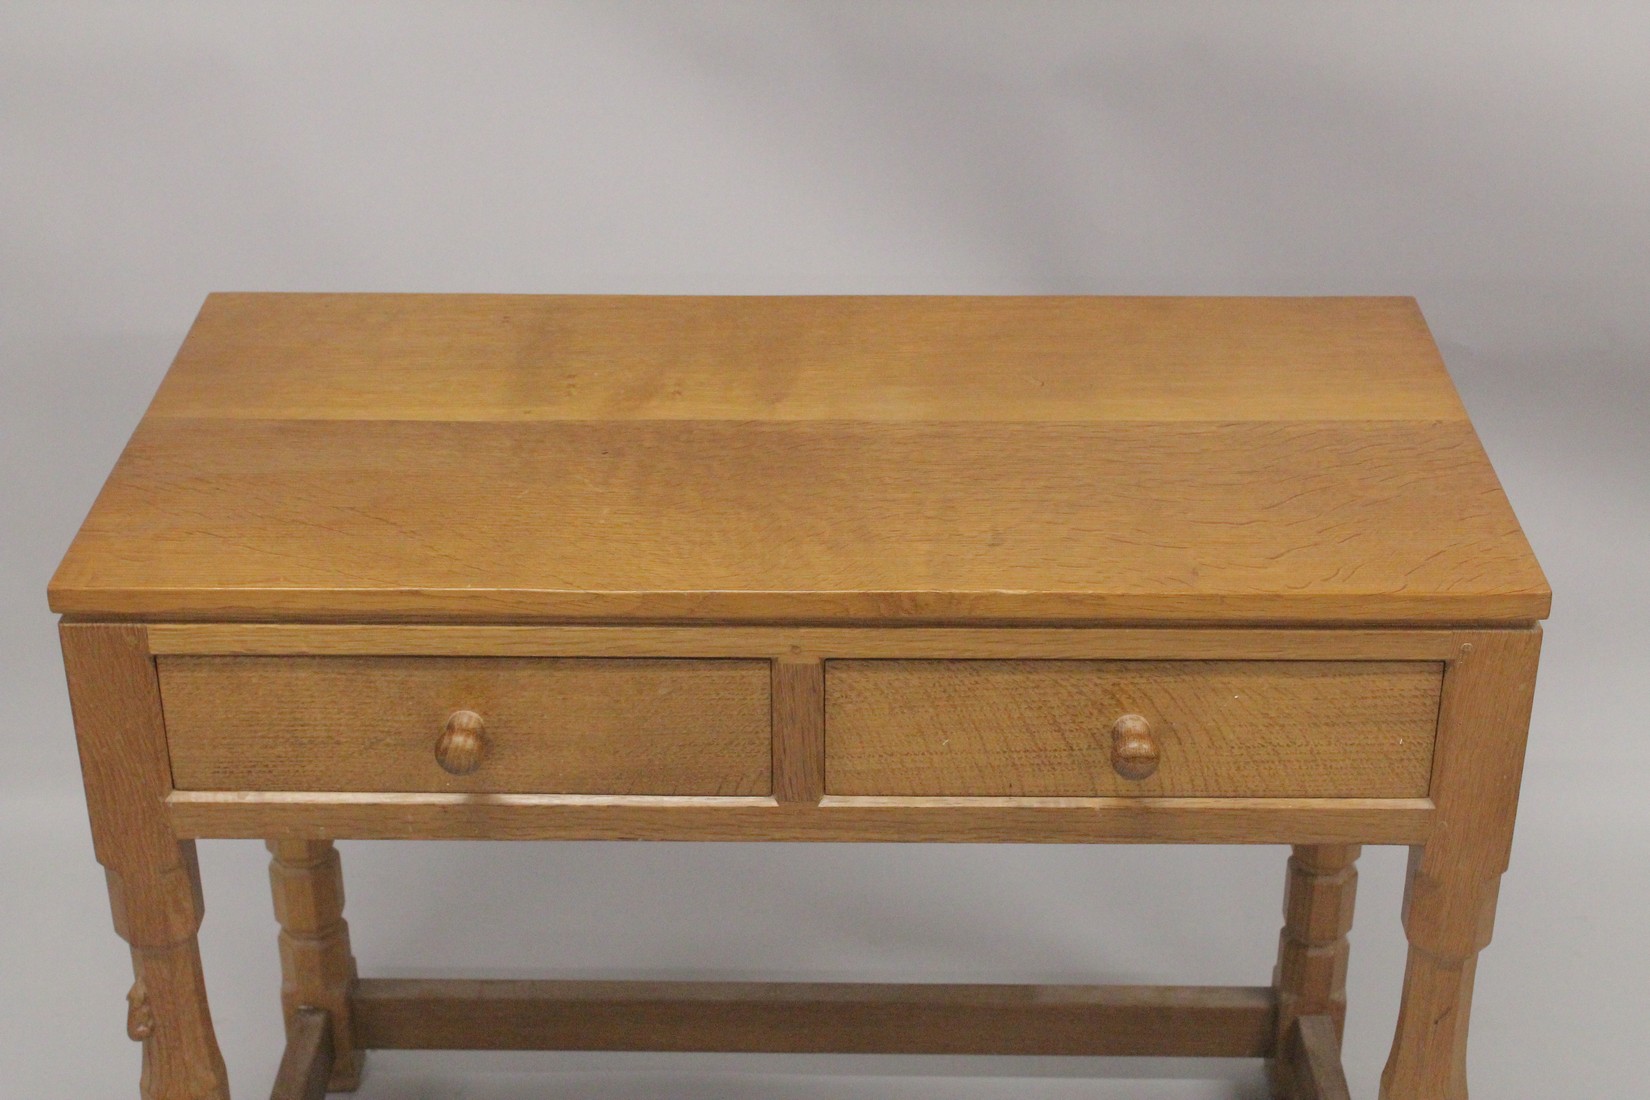 ROBERT "MOUSEMAN" THOMPSON. AN OAK SIDE TABLE with an adzed rectangular top, two frieze drawers with - Image 2 of 5